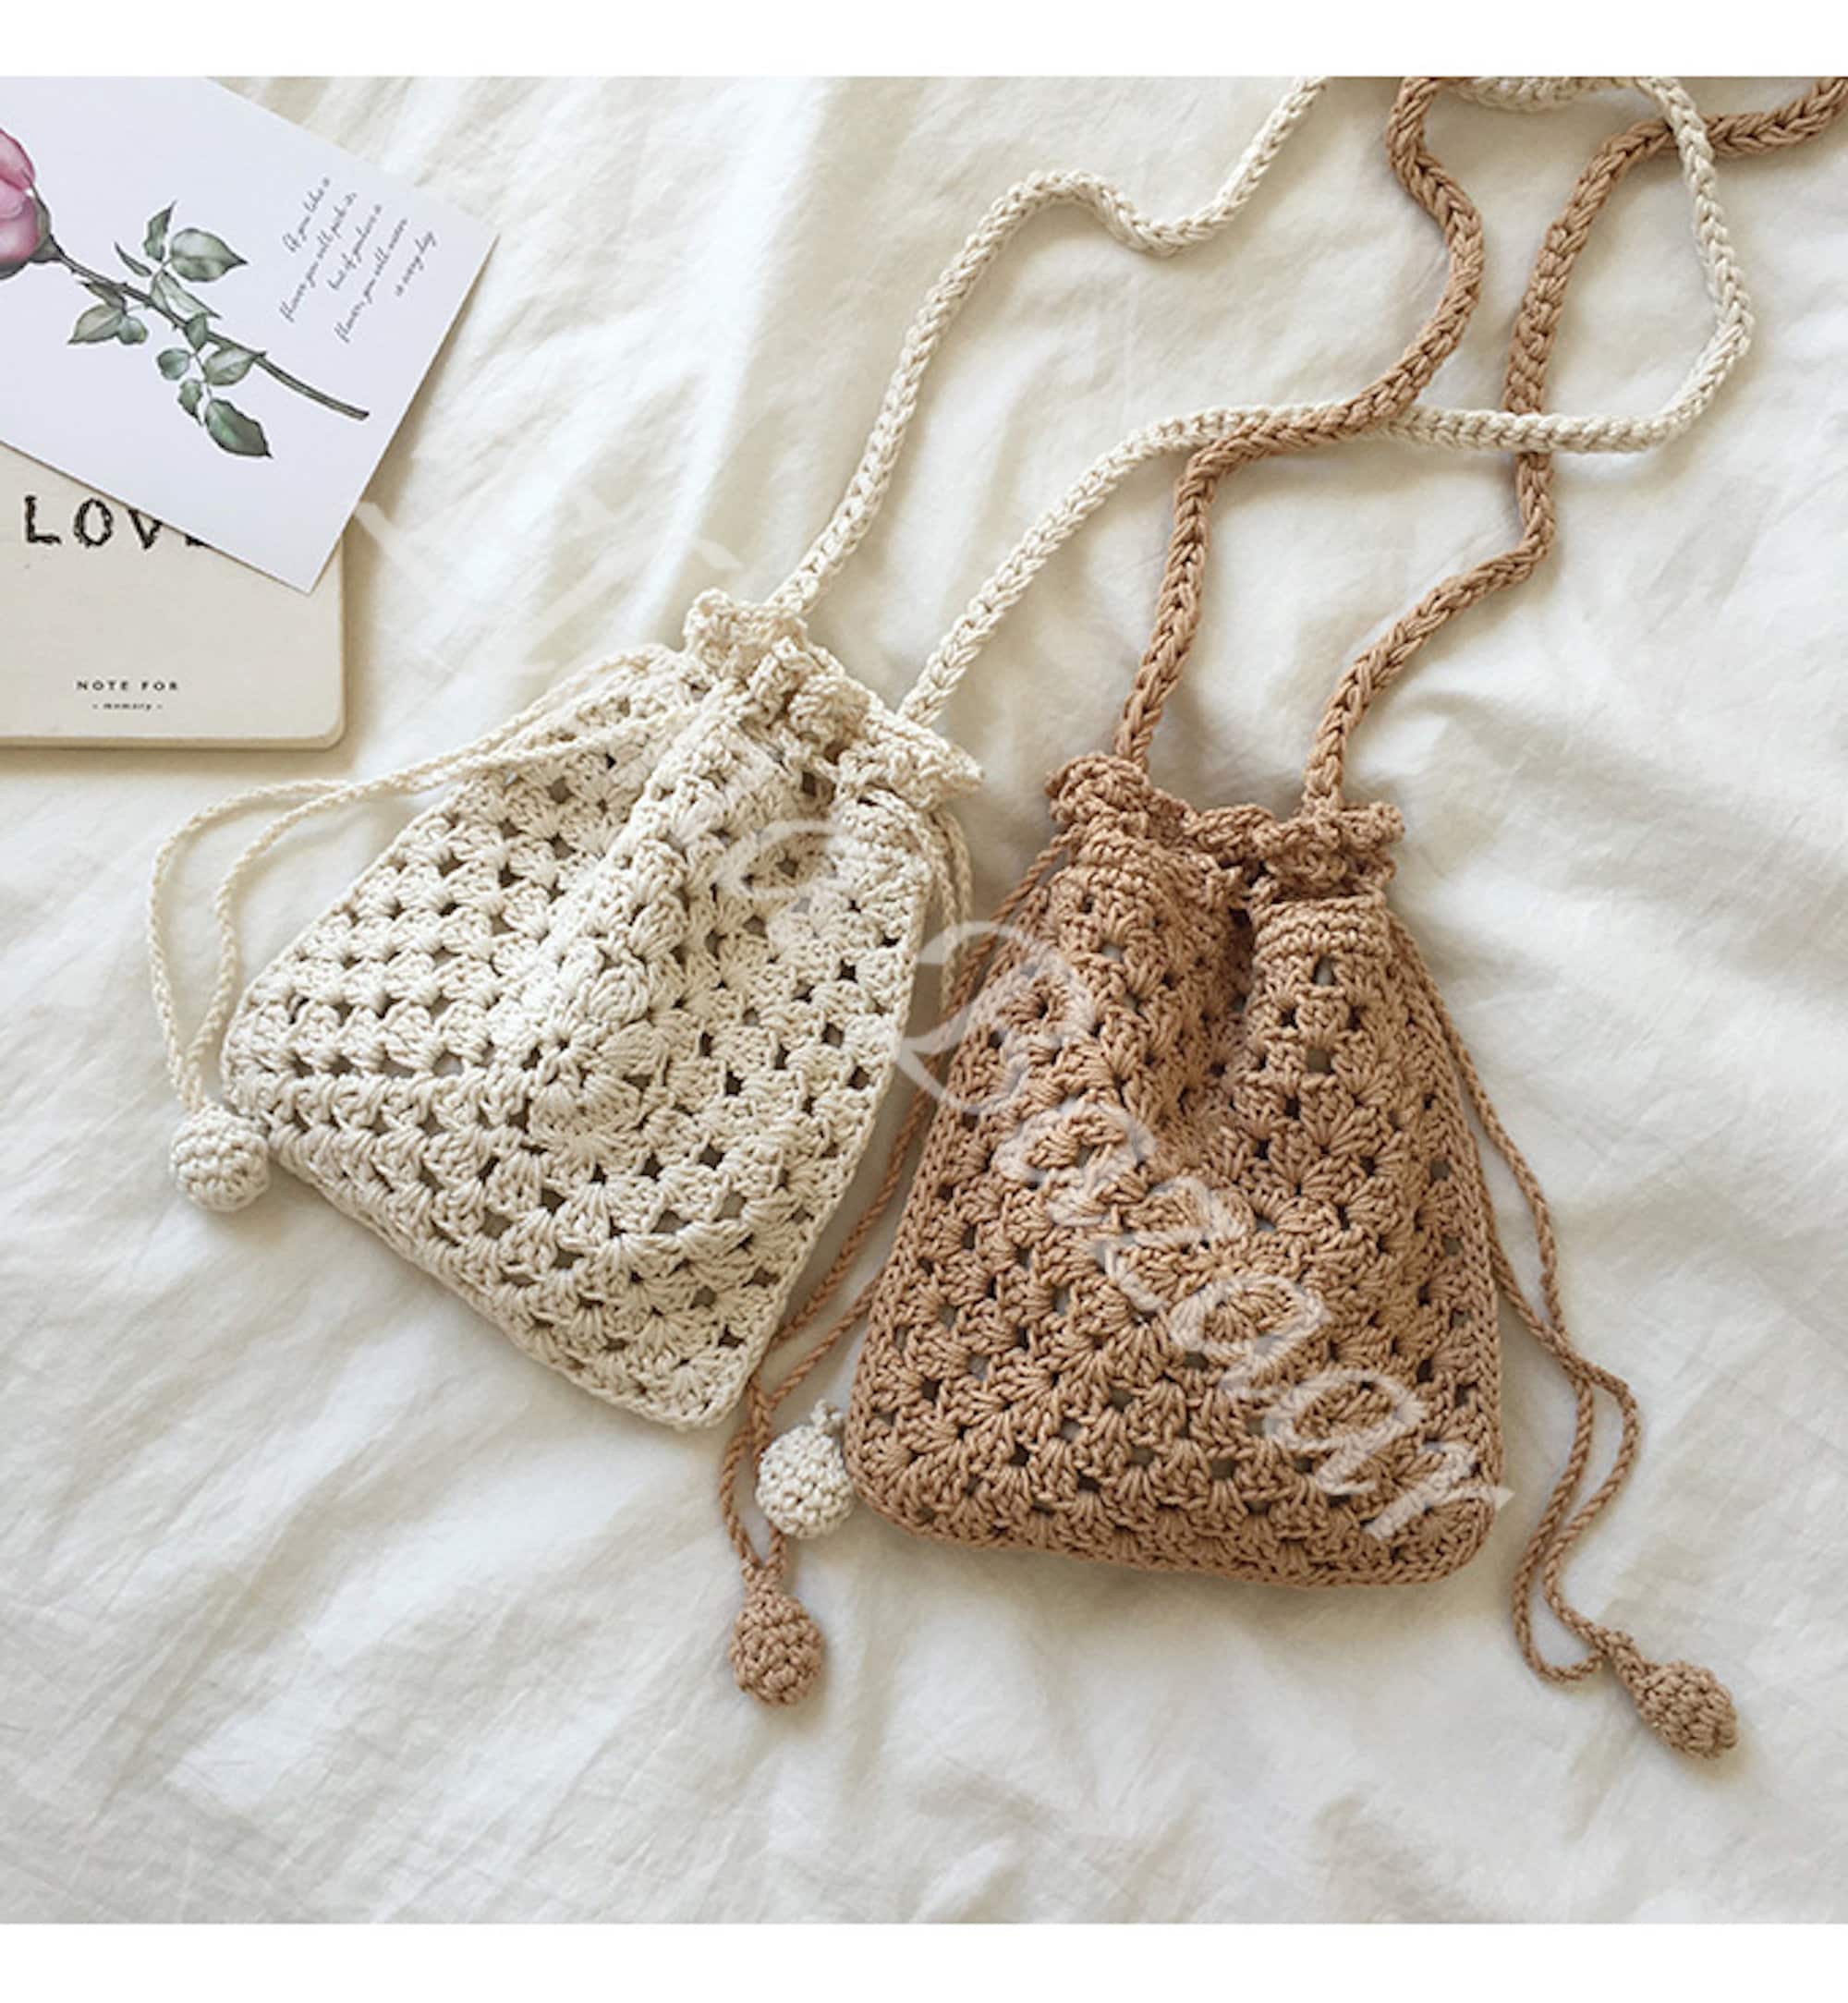 Ravelry: Cotton Cakes Knotted Strap Bag pattern by Esther Thompson